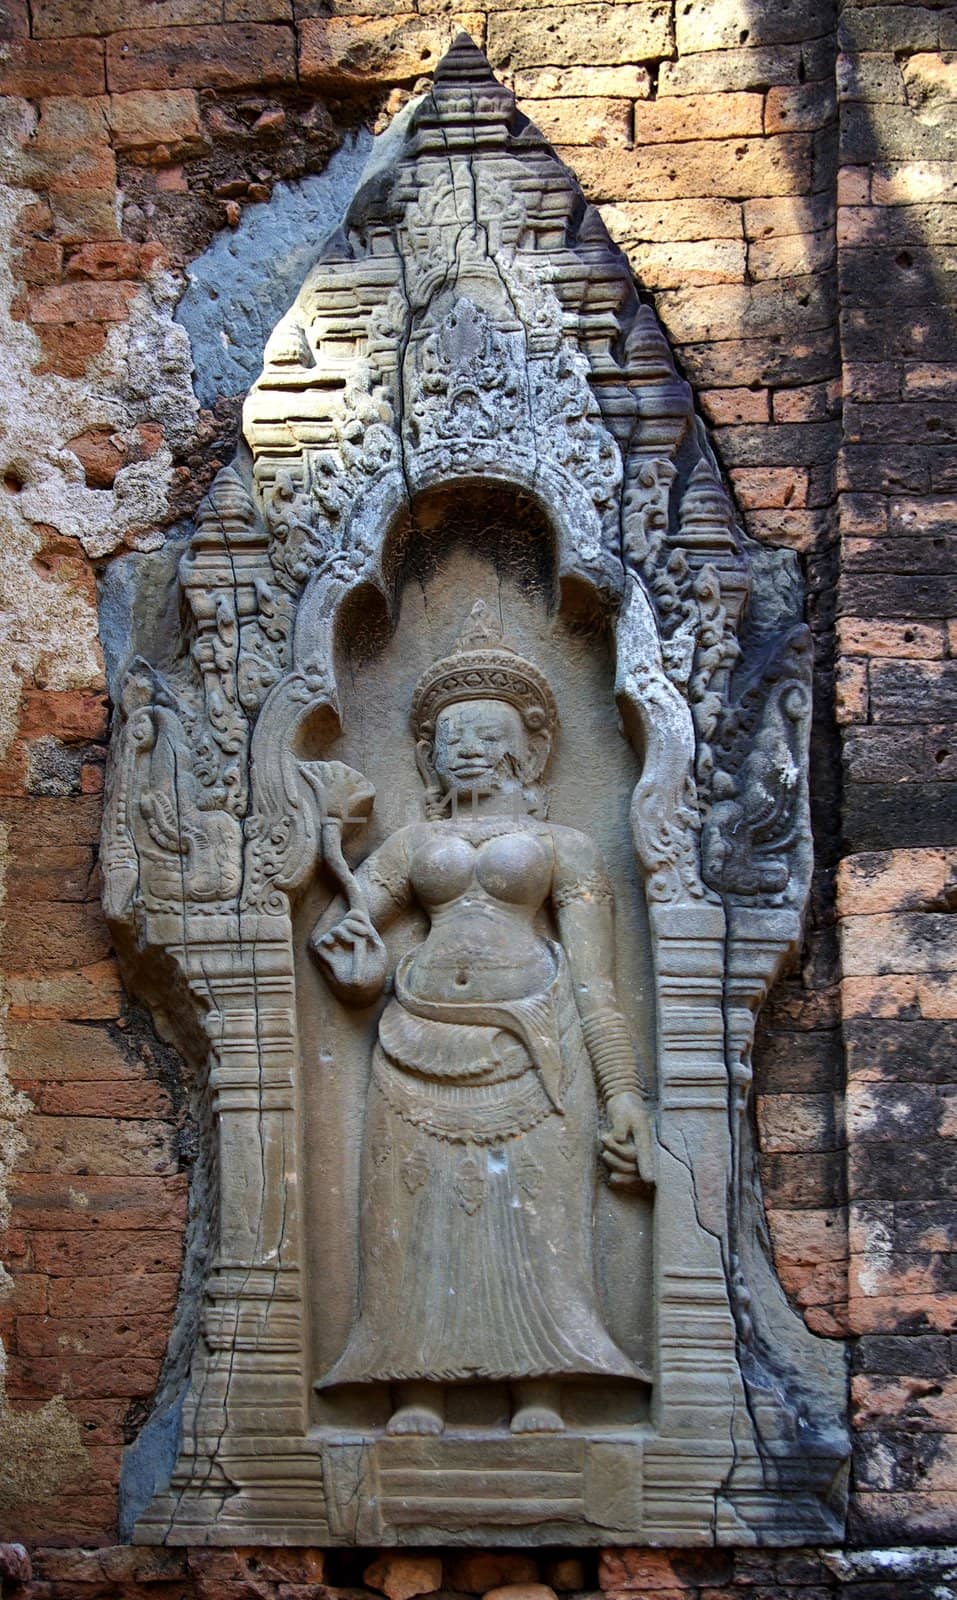 One engraved women on a brik wall temple in Angkor by shkyo30